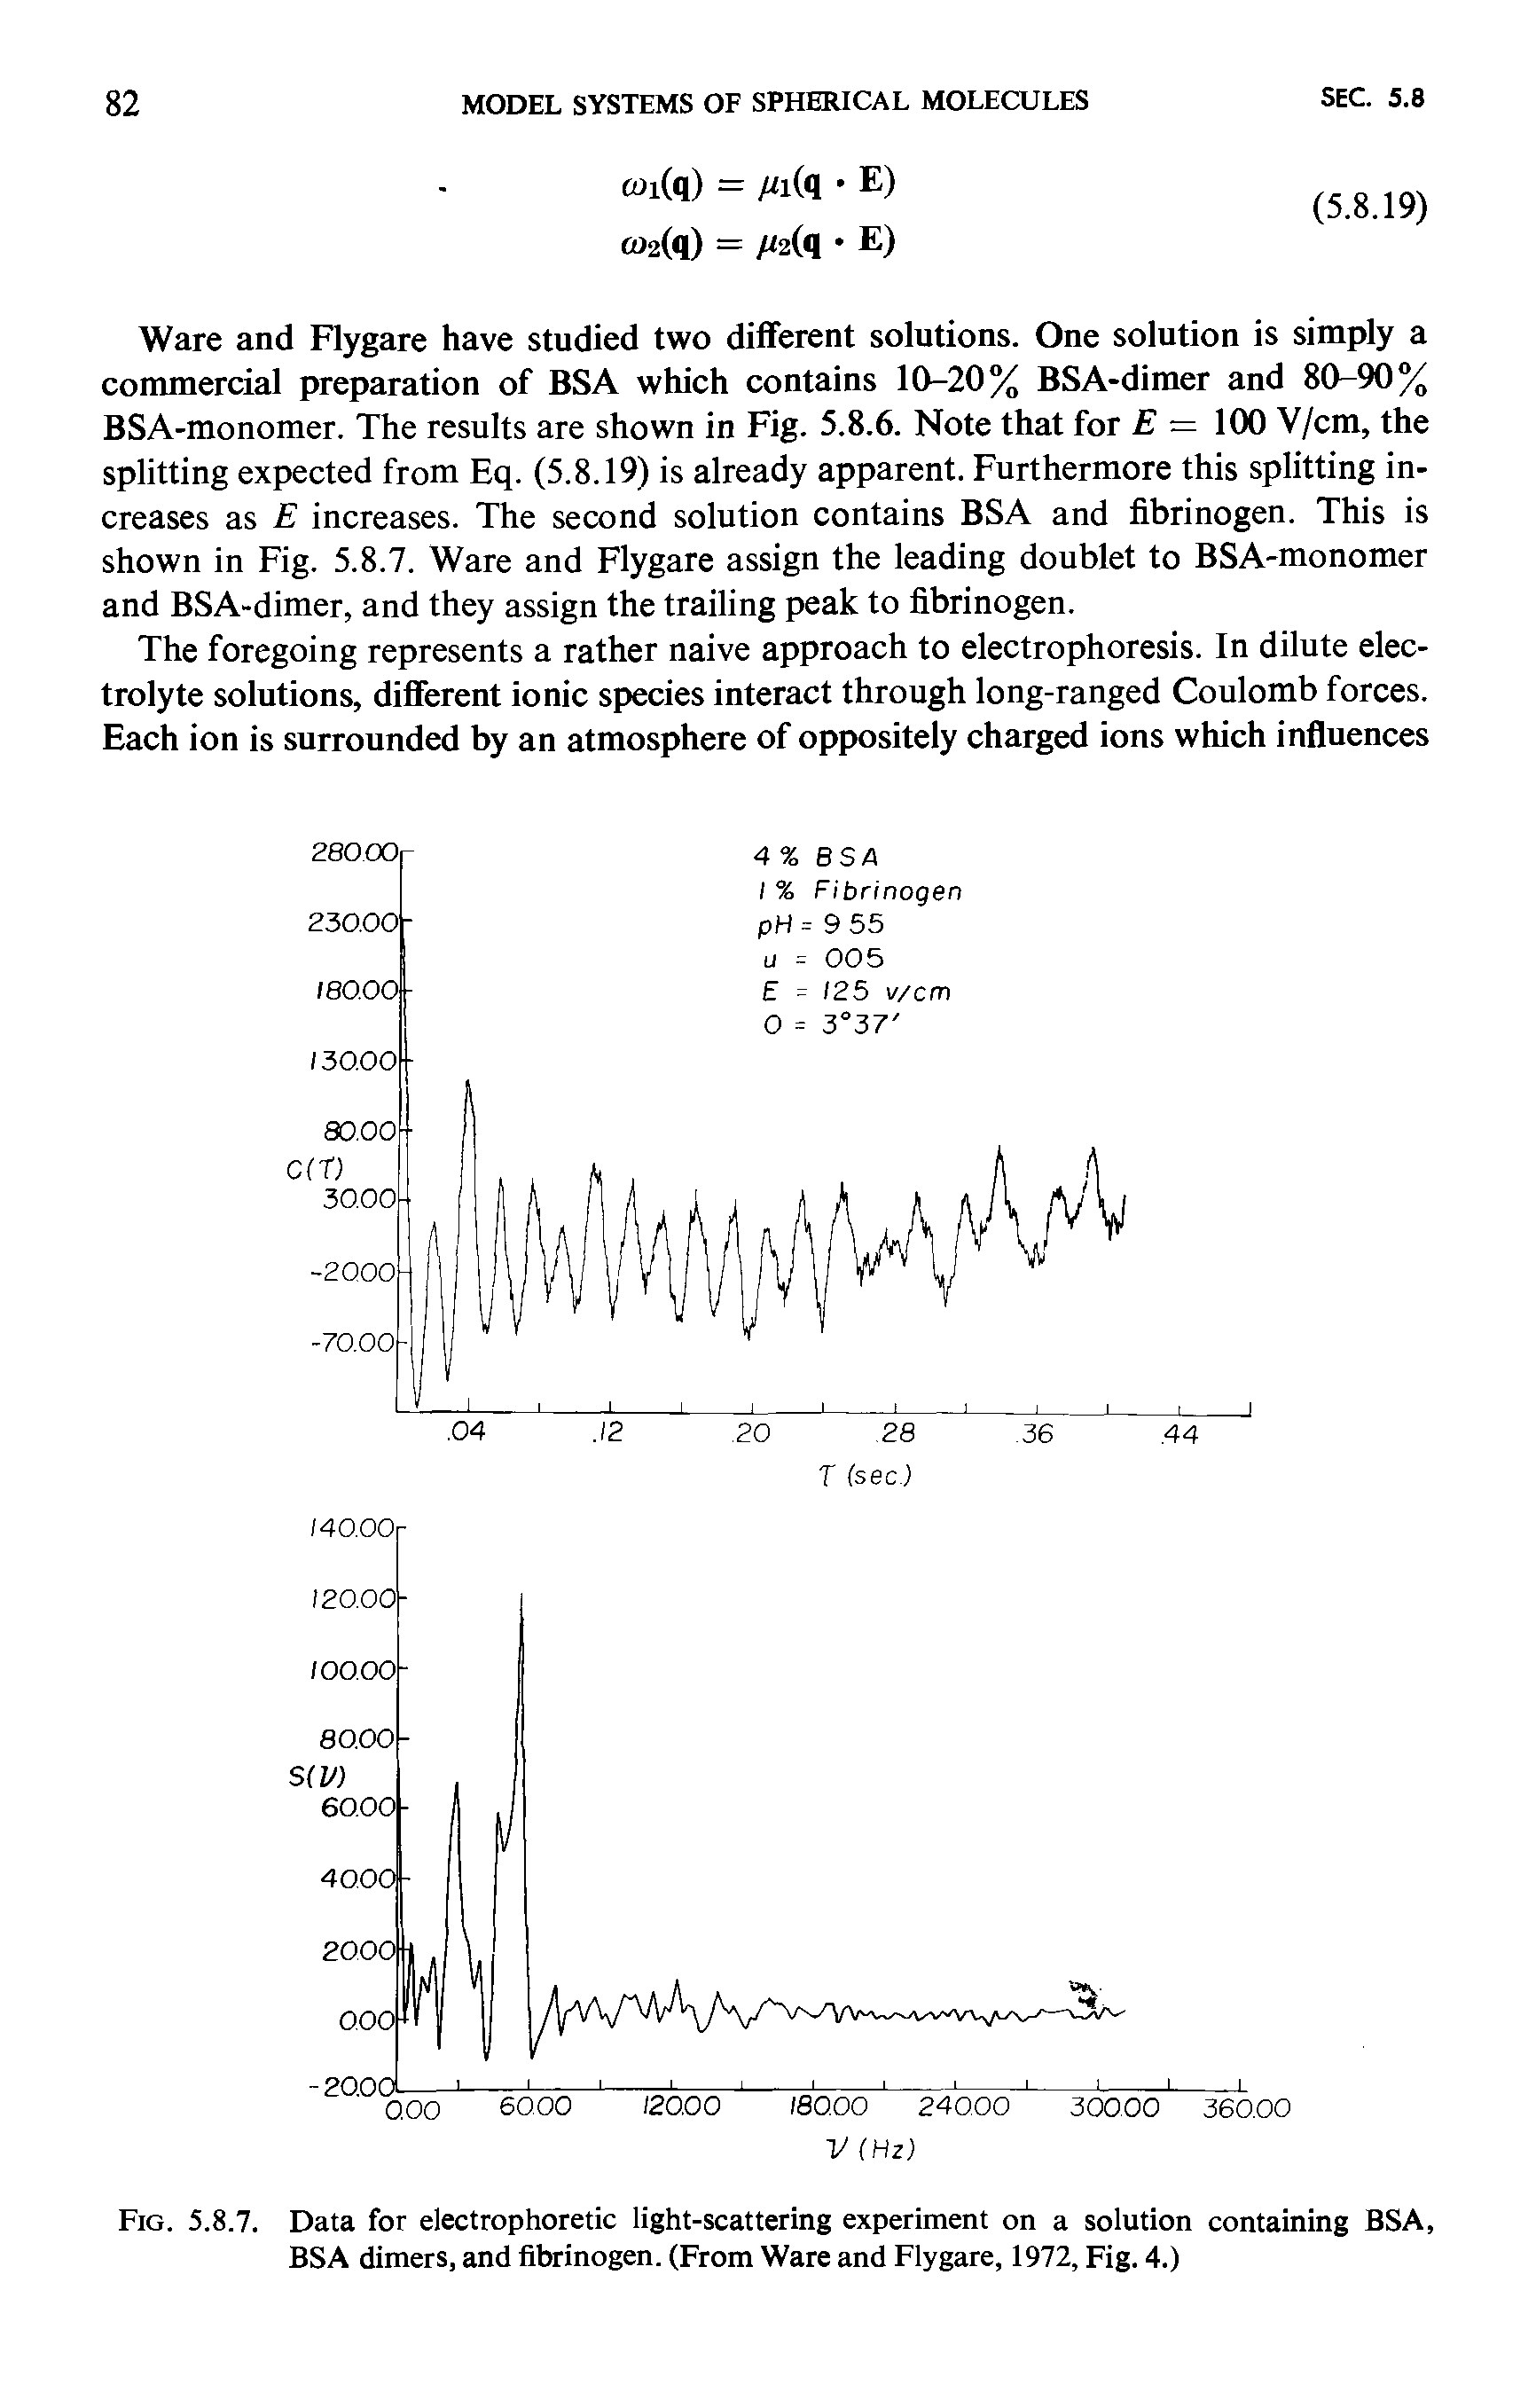 Fig. 5.8.7. Data for electrophoretic light-scattering experiment on a solution containing BSA, BSA dimers, and fibrinogen. (From Ware and Flygare, 1972, Fig. 4.)...